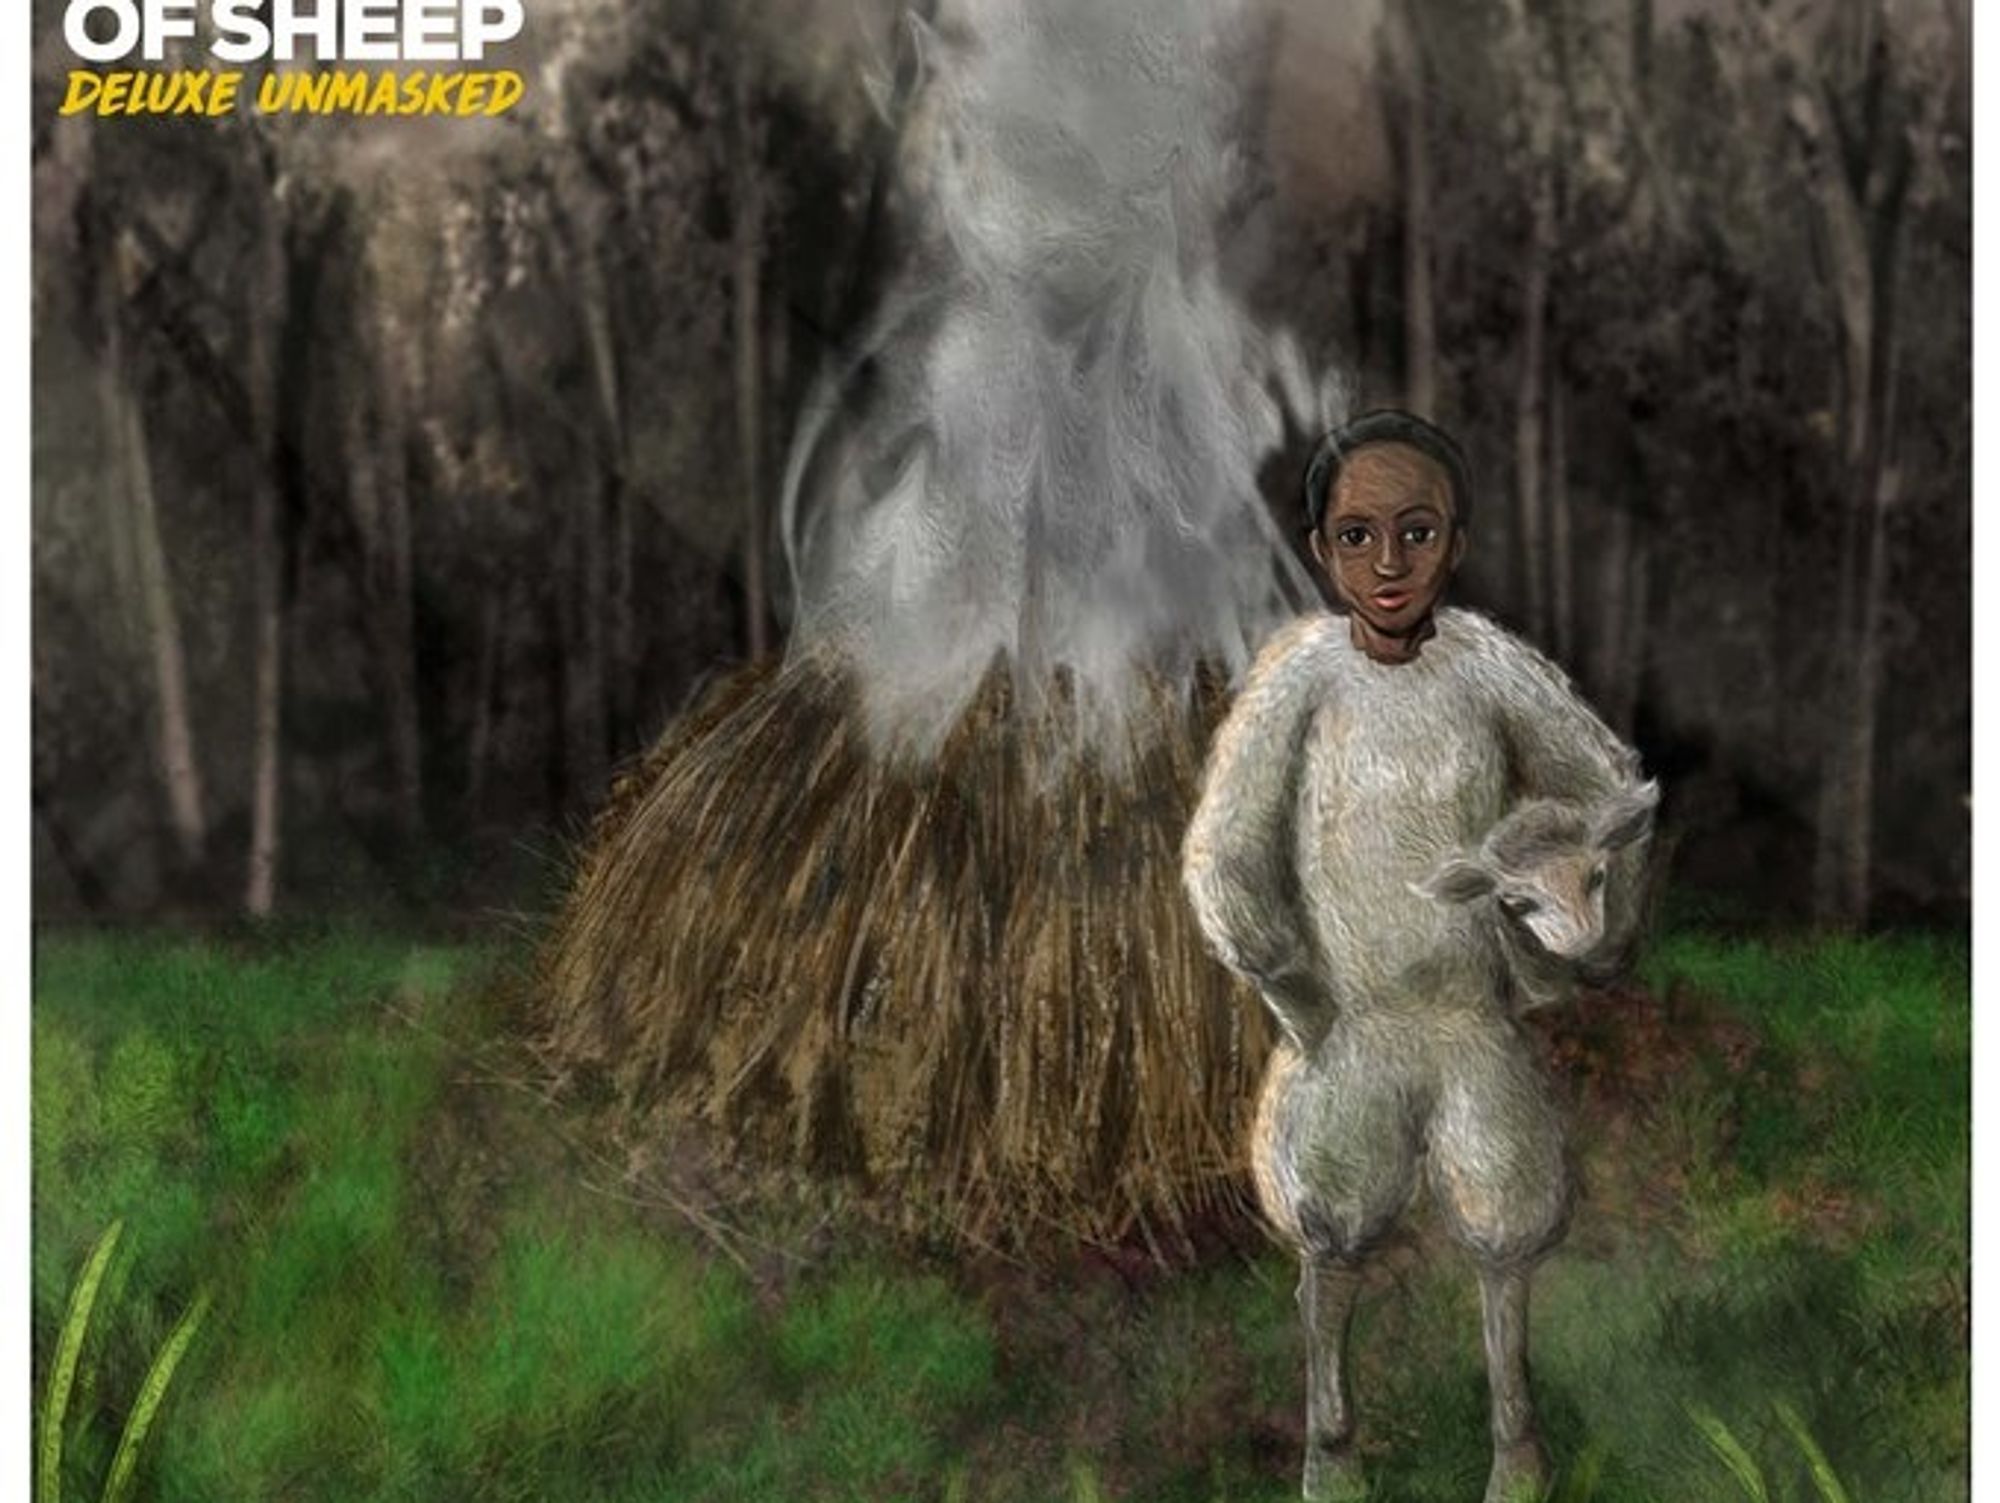 Stogie T Enlists Nasty C, Boity, Nadia Nakai and More, for ‘The Empire of Sheep’ Deluxe Edition